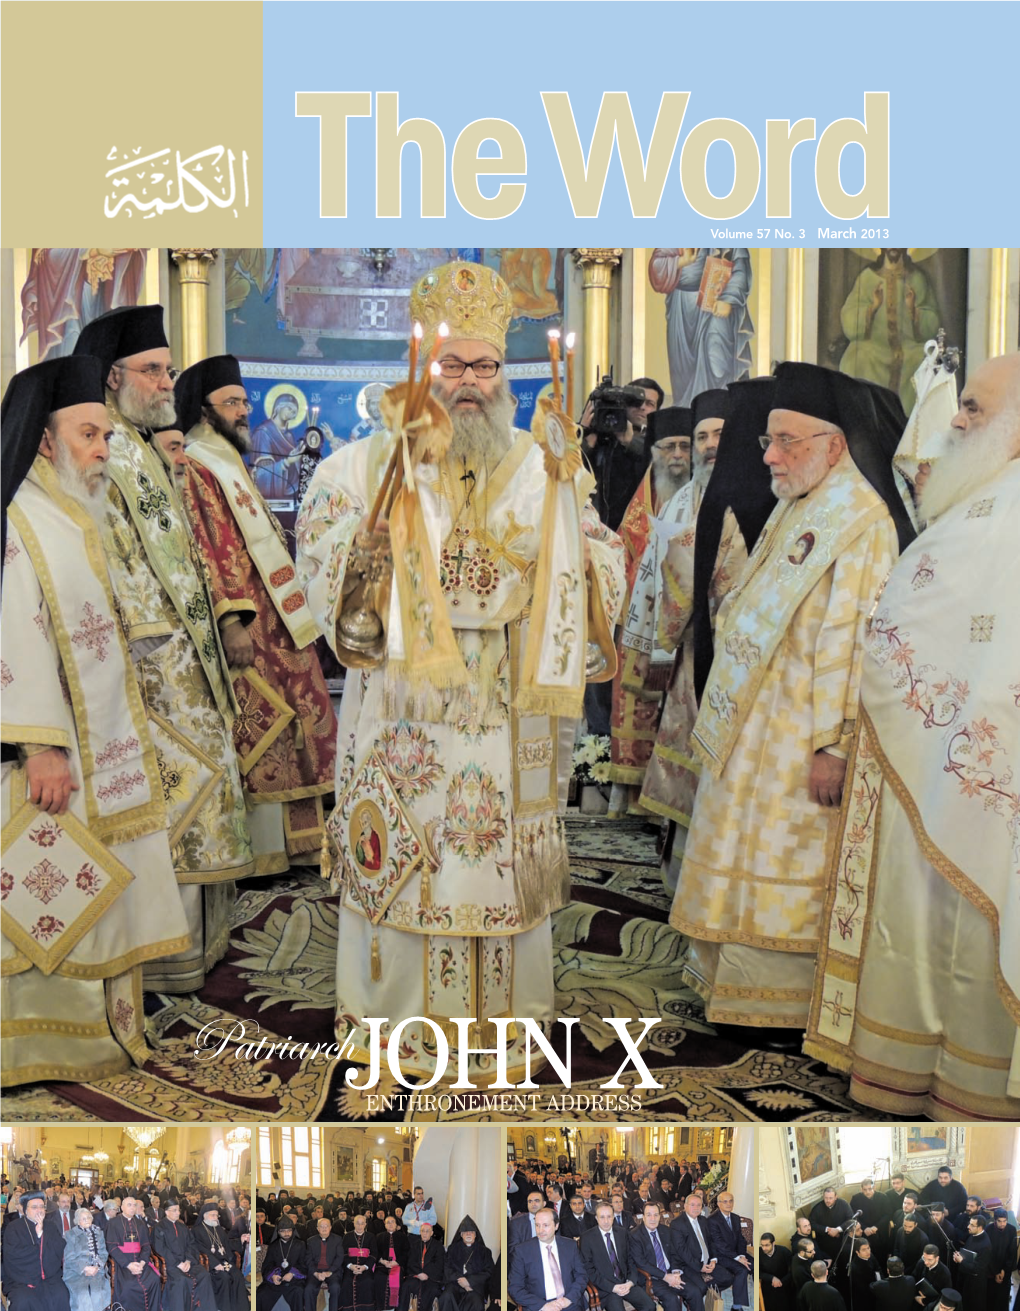 The Word, March 2013